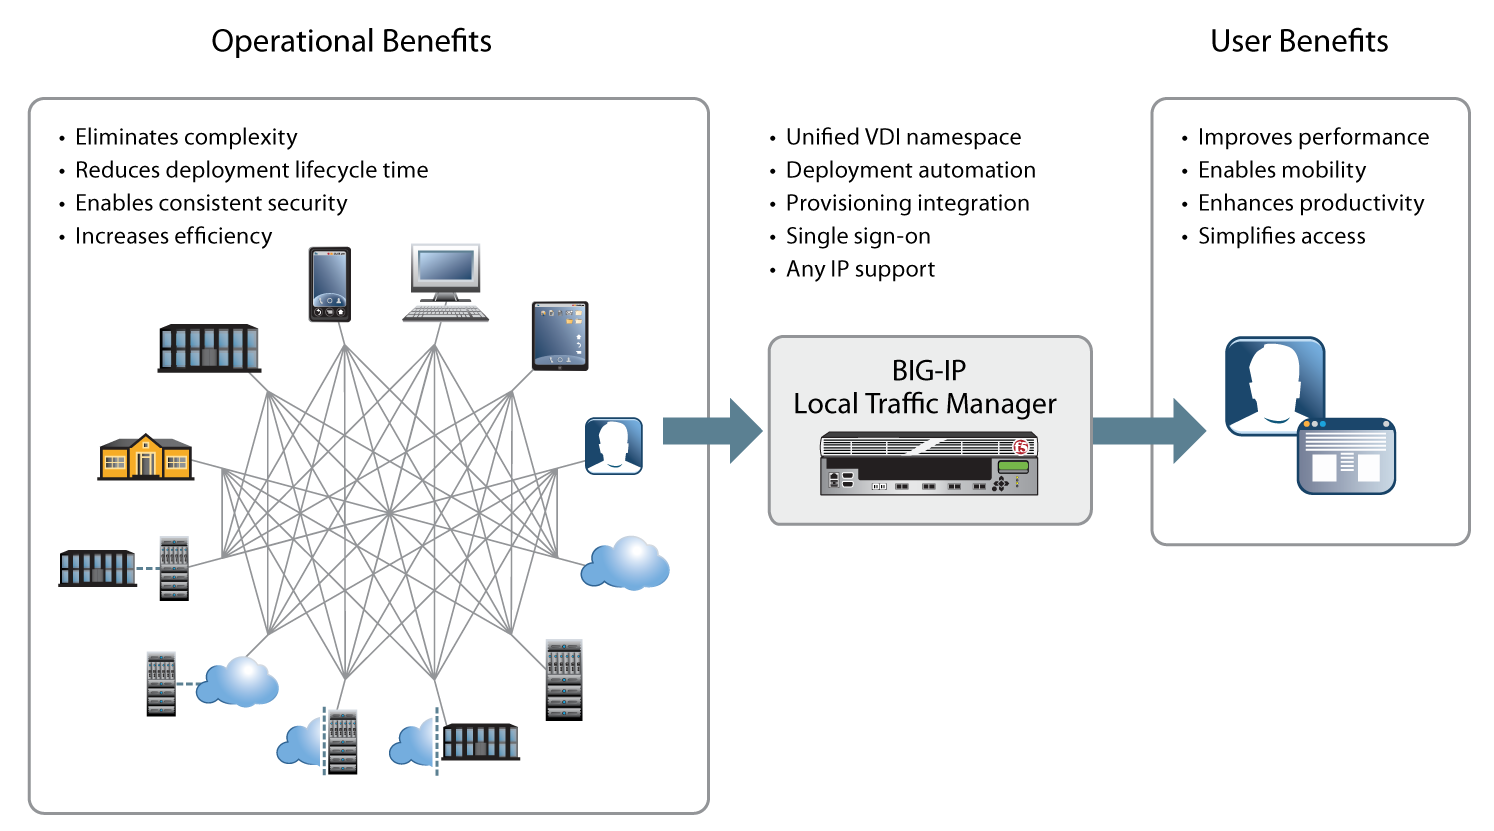 Operational and User Benefits of using BIG-IP Local Traffic Manager